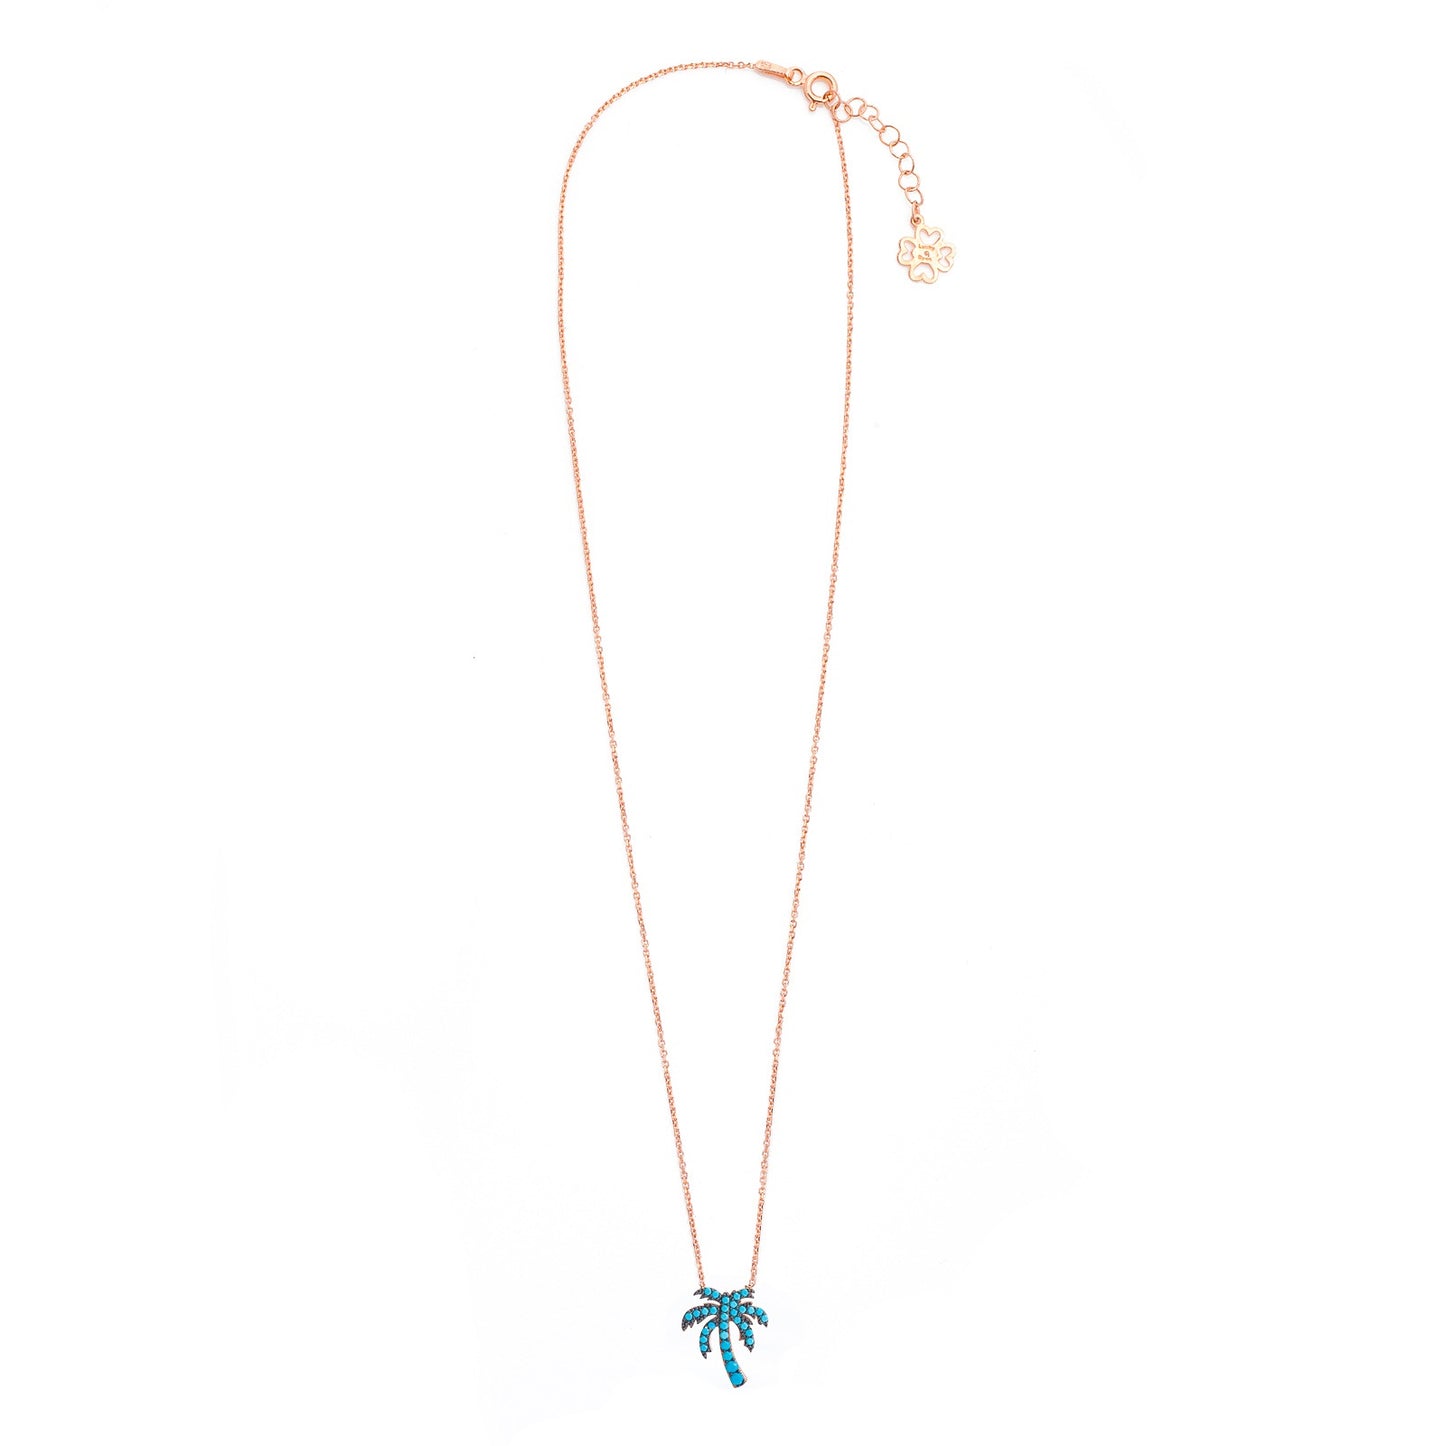 Lucky Eyes Turquoise Palm Necklace - ‘Ibiza Vibes’ Collection